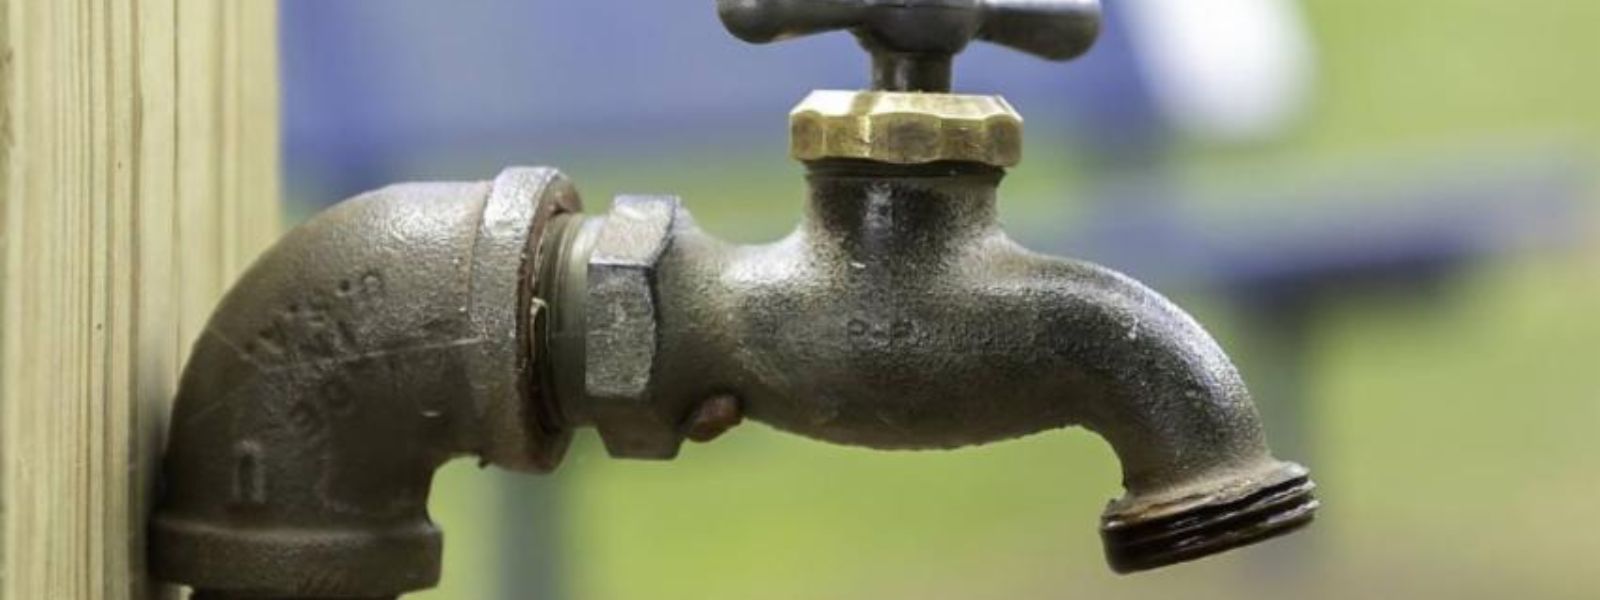 10-hour water cut to several areas in Colombo